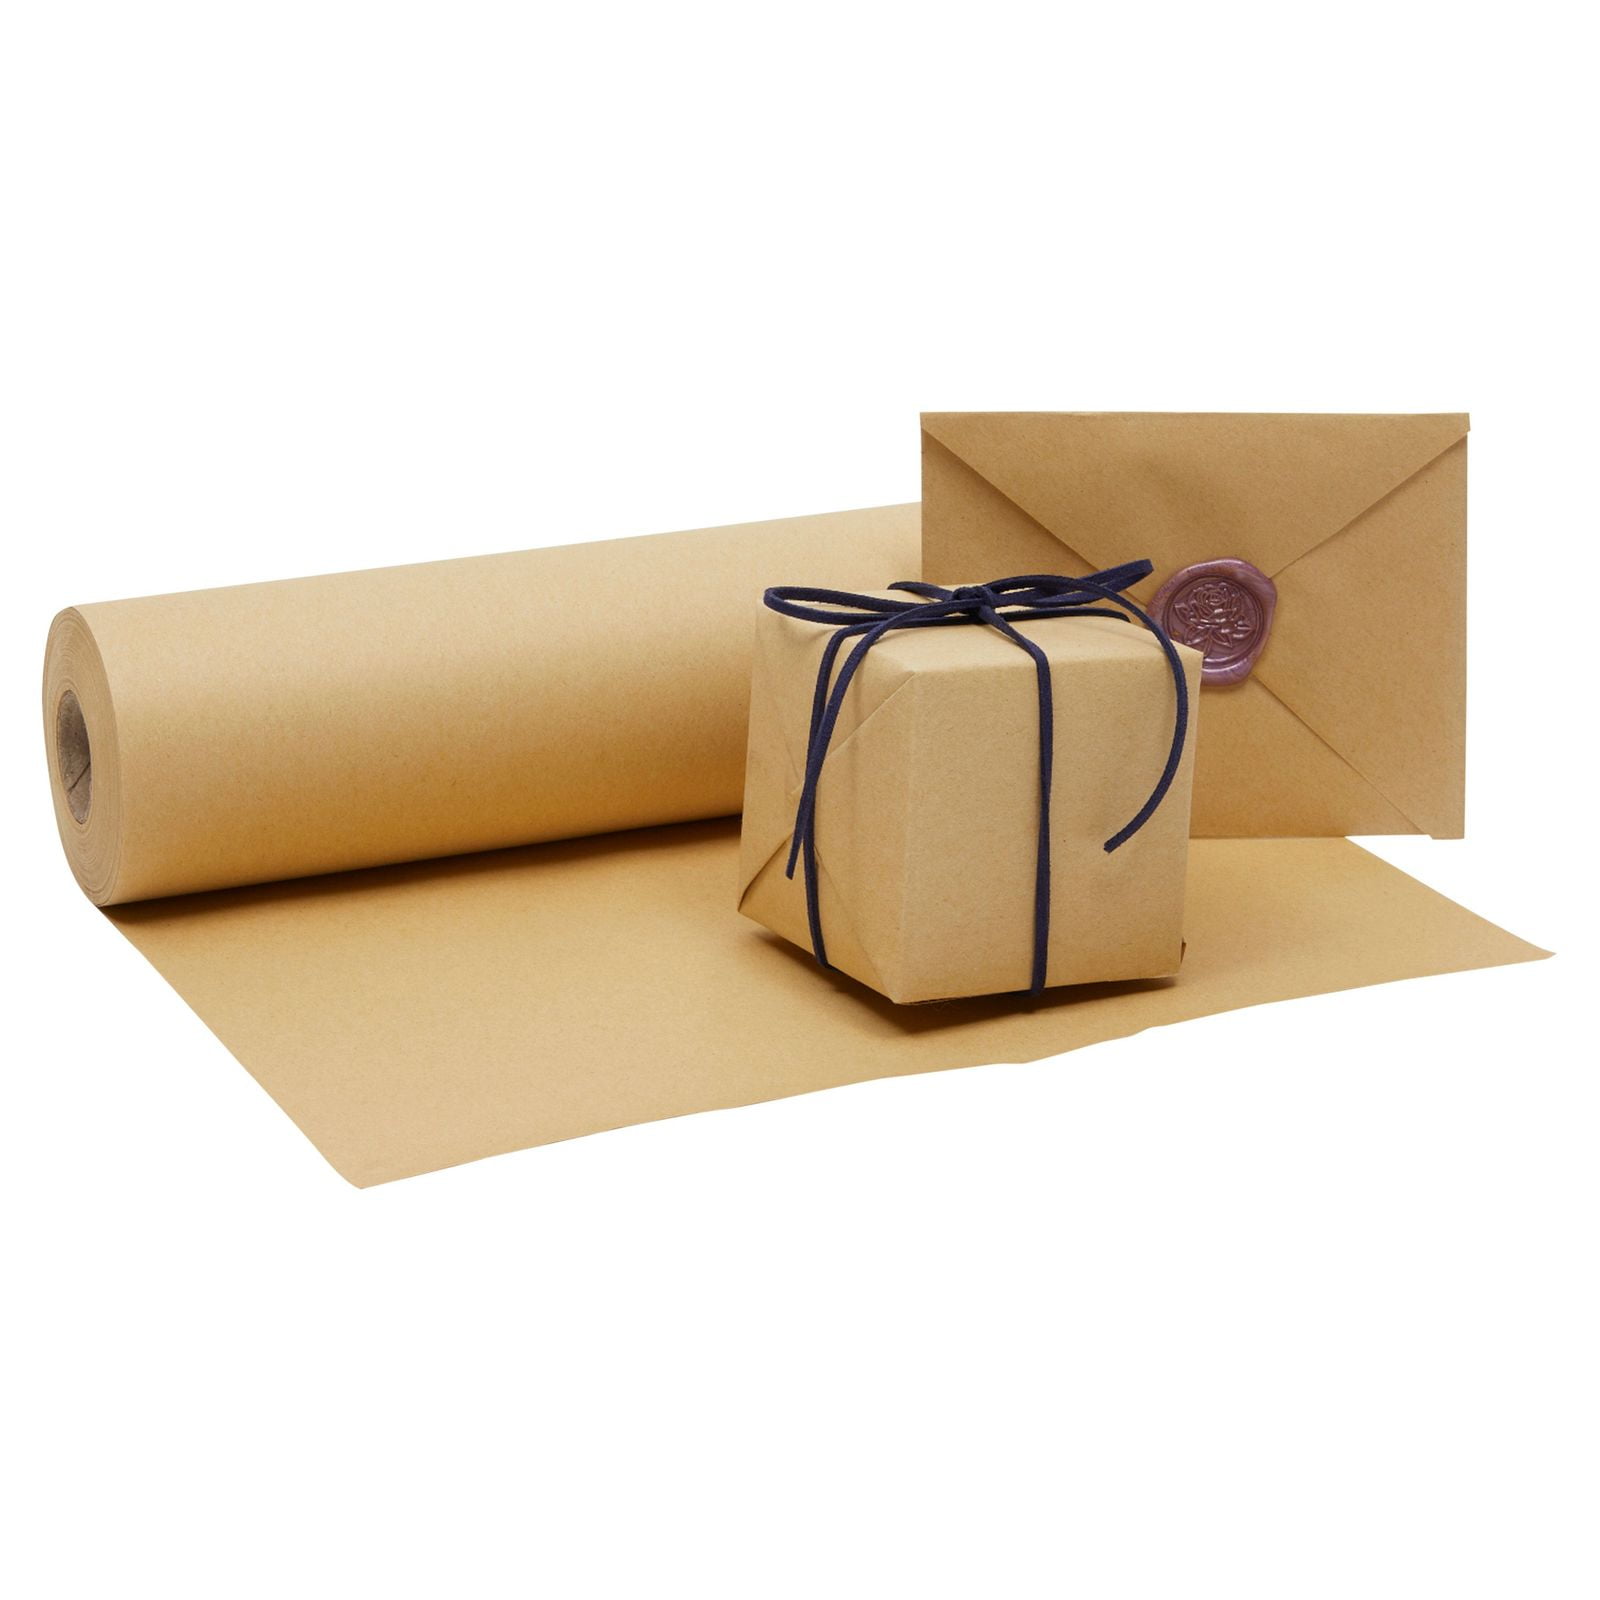 18" x 1200" Brown Kraft Paper Roll Shipping Wrapping Cushioning Void Fill US 